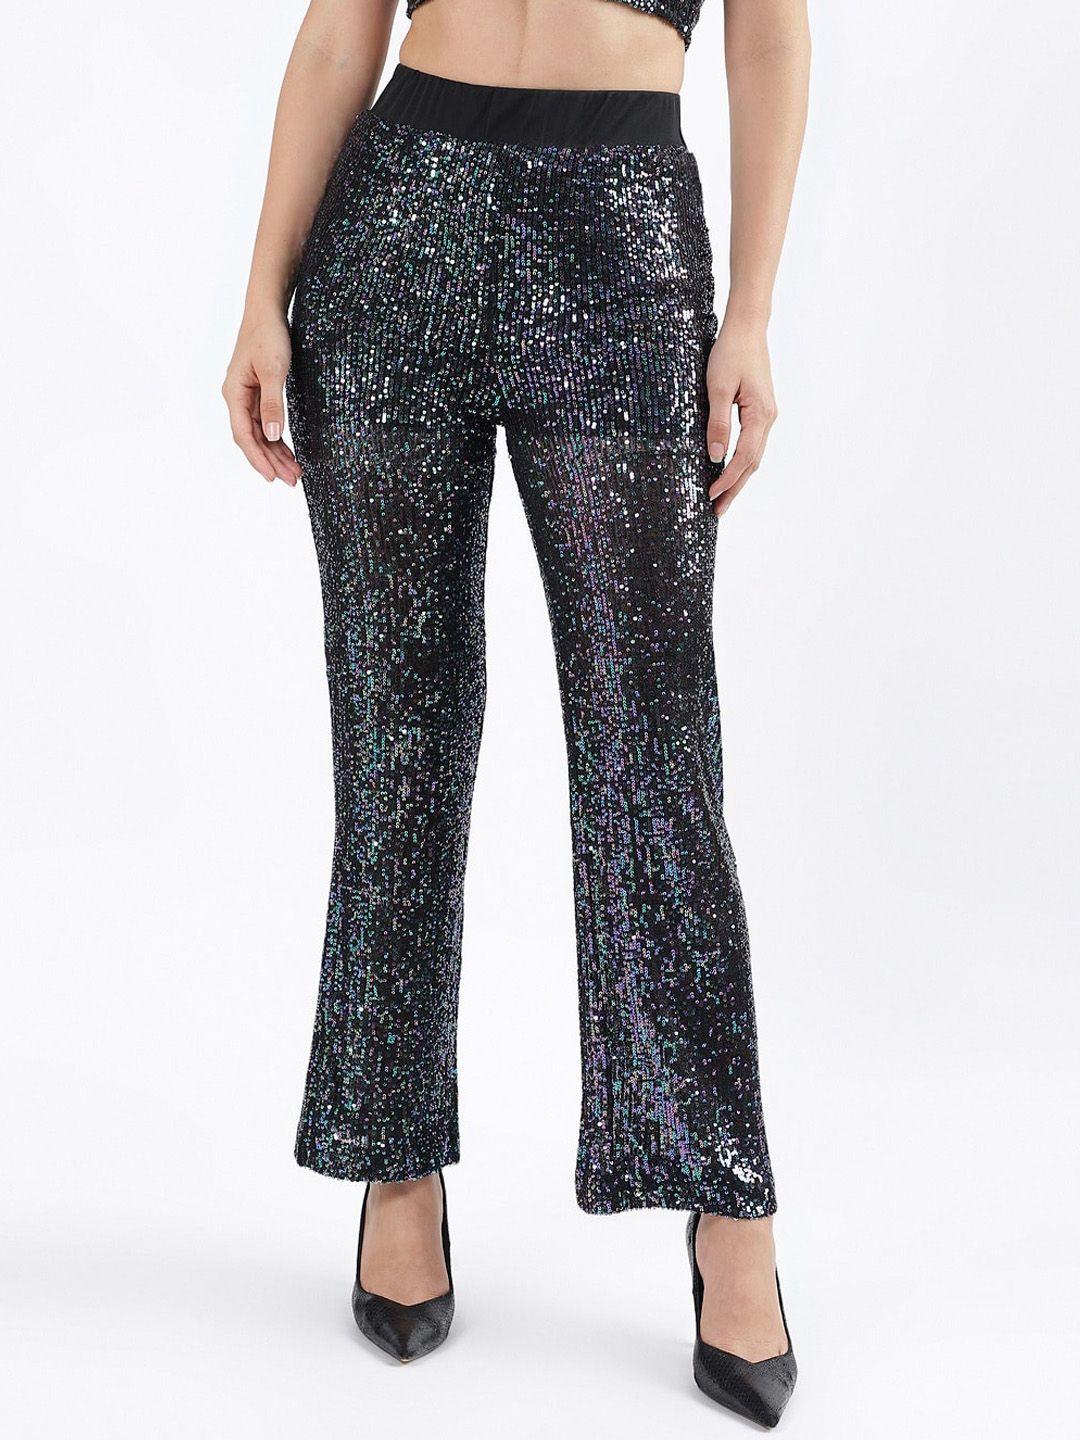 centrestage-women-flared-trousers